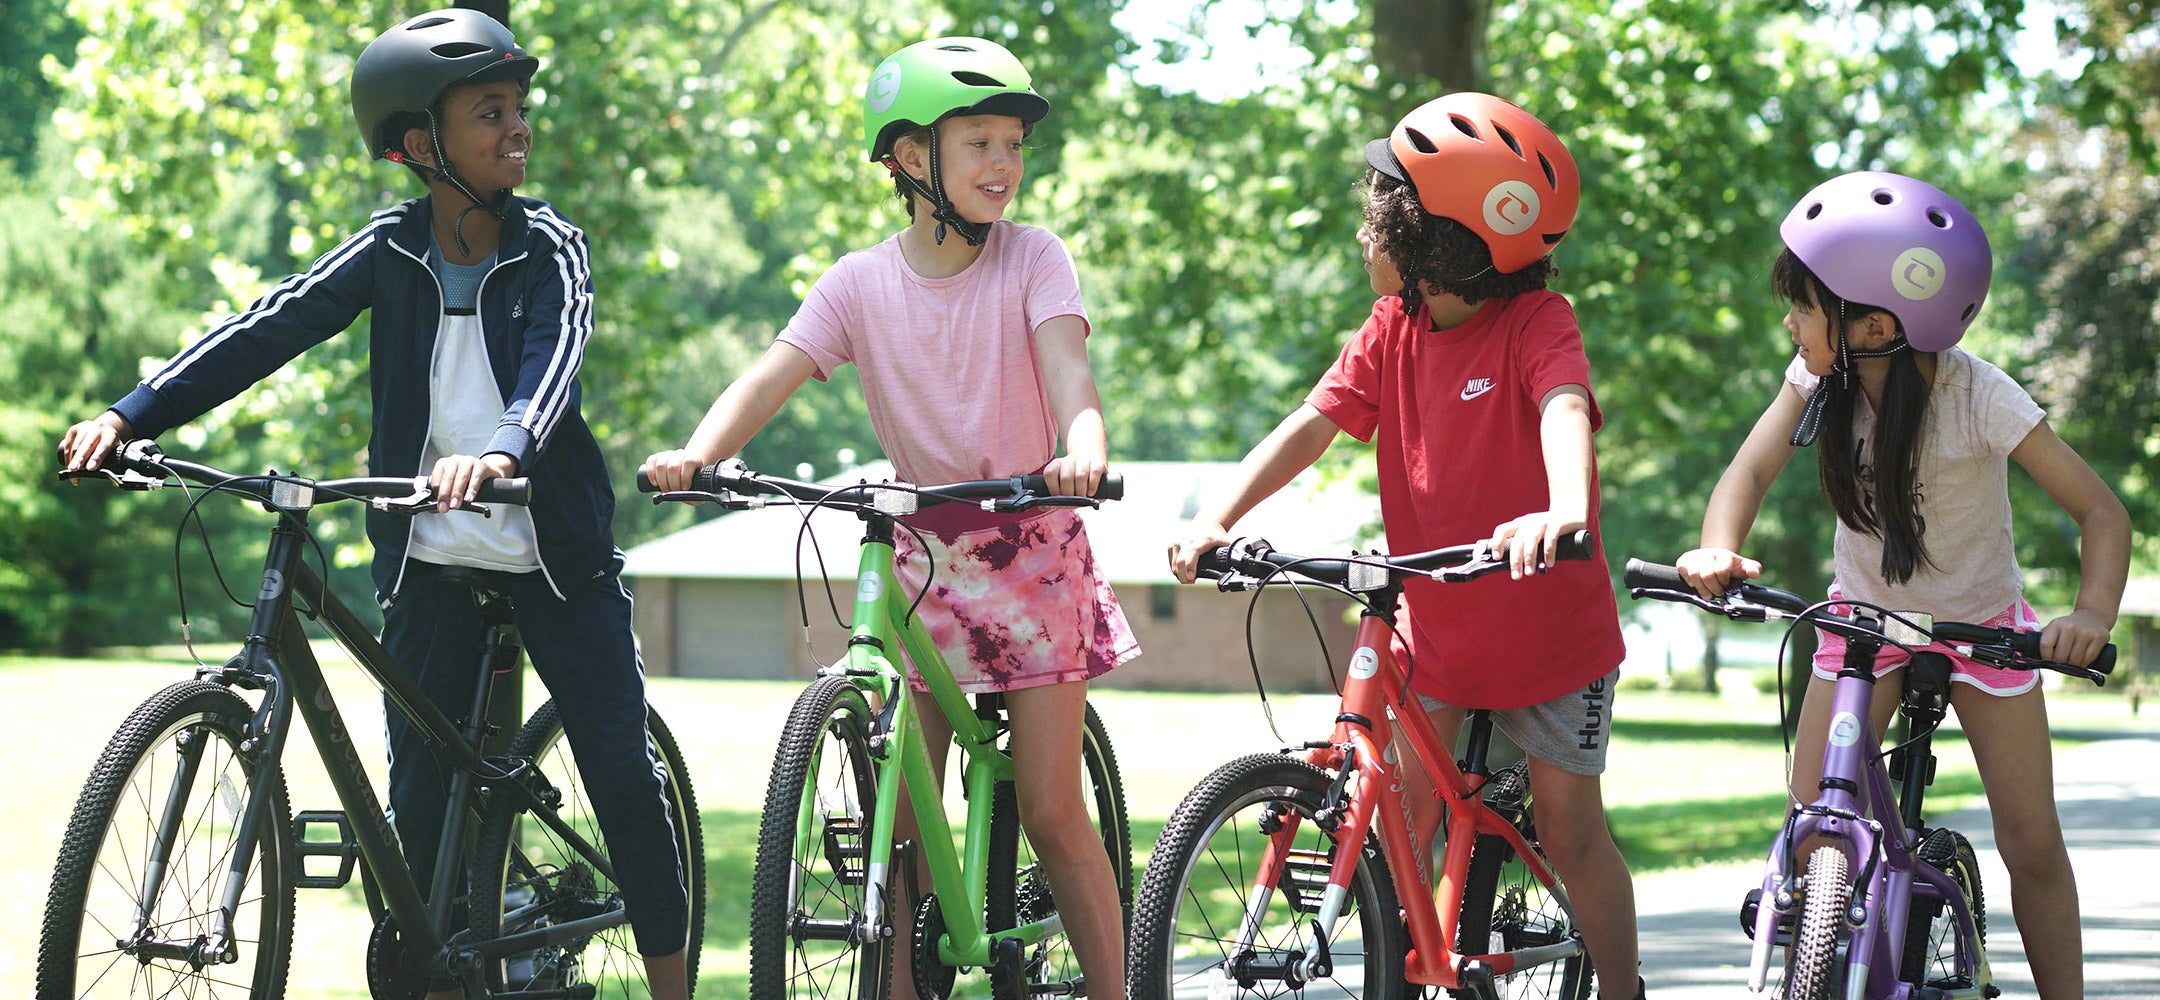 A lineup of kids standing side by side with their 12" to 26" CYCLEKids Bikes and matching helmets